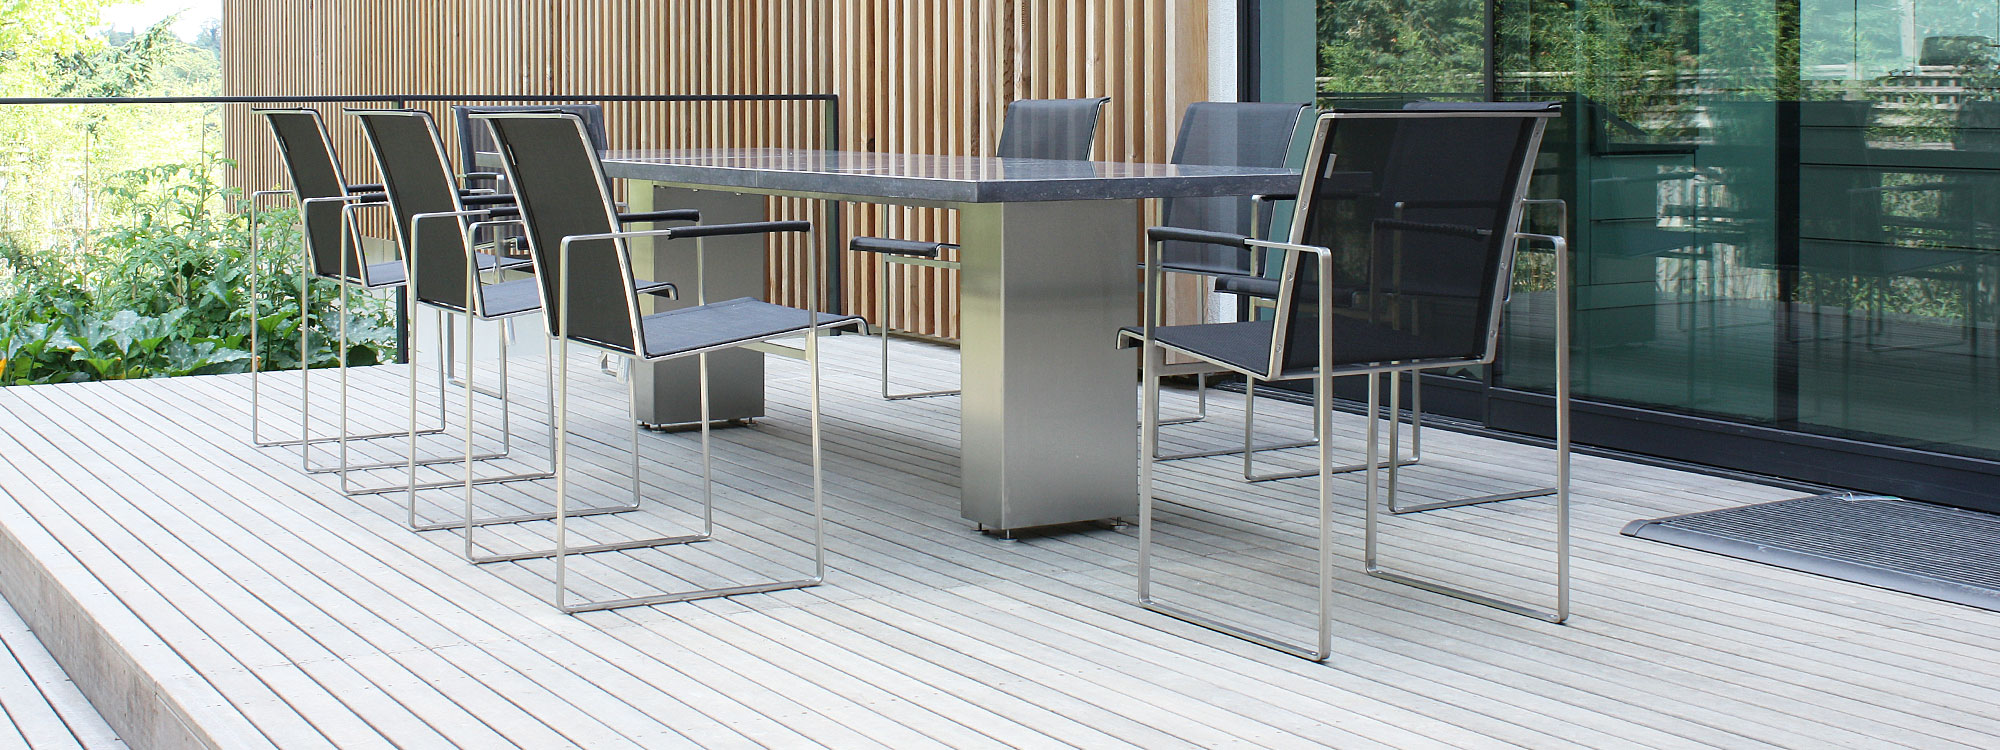 Image of London installation of FueraDentro Doble modern garden table and Sillon minimalist outdoor chairs